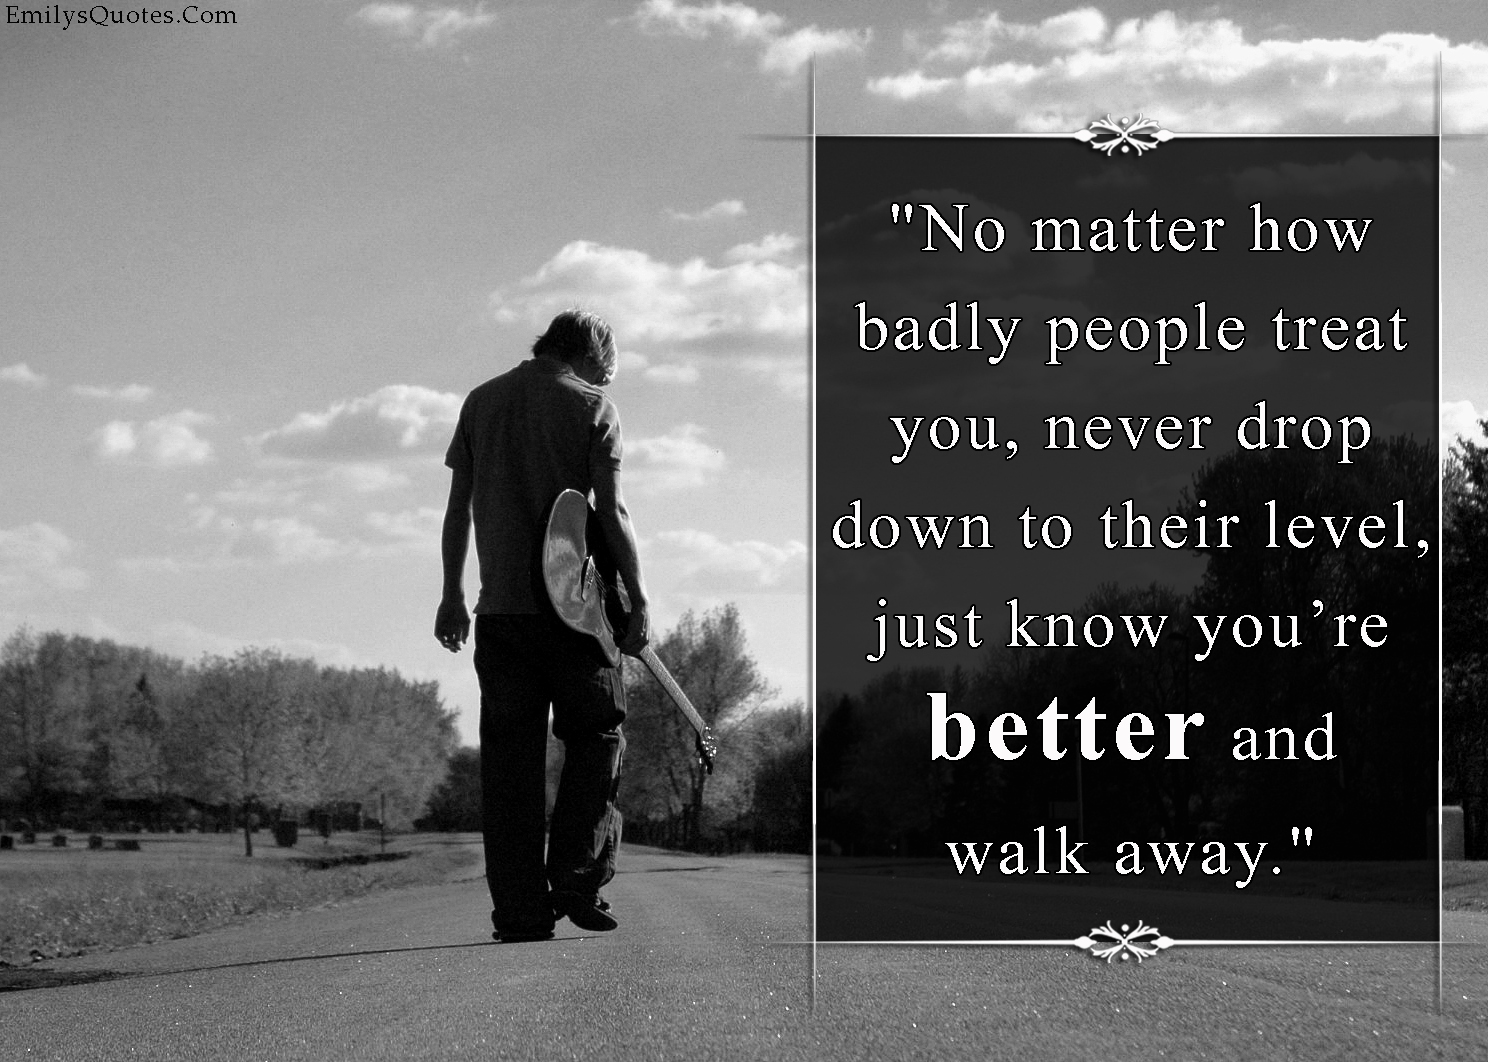 No matter how badly people treat you, never drop down to their level, just know you’re better and walk away